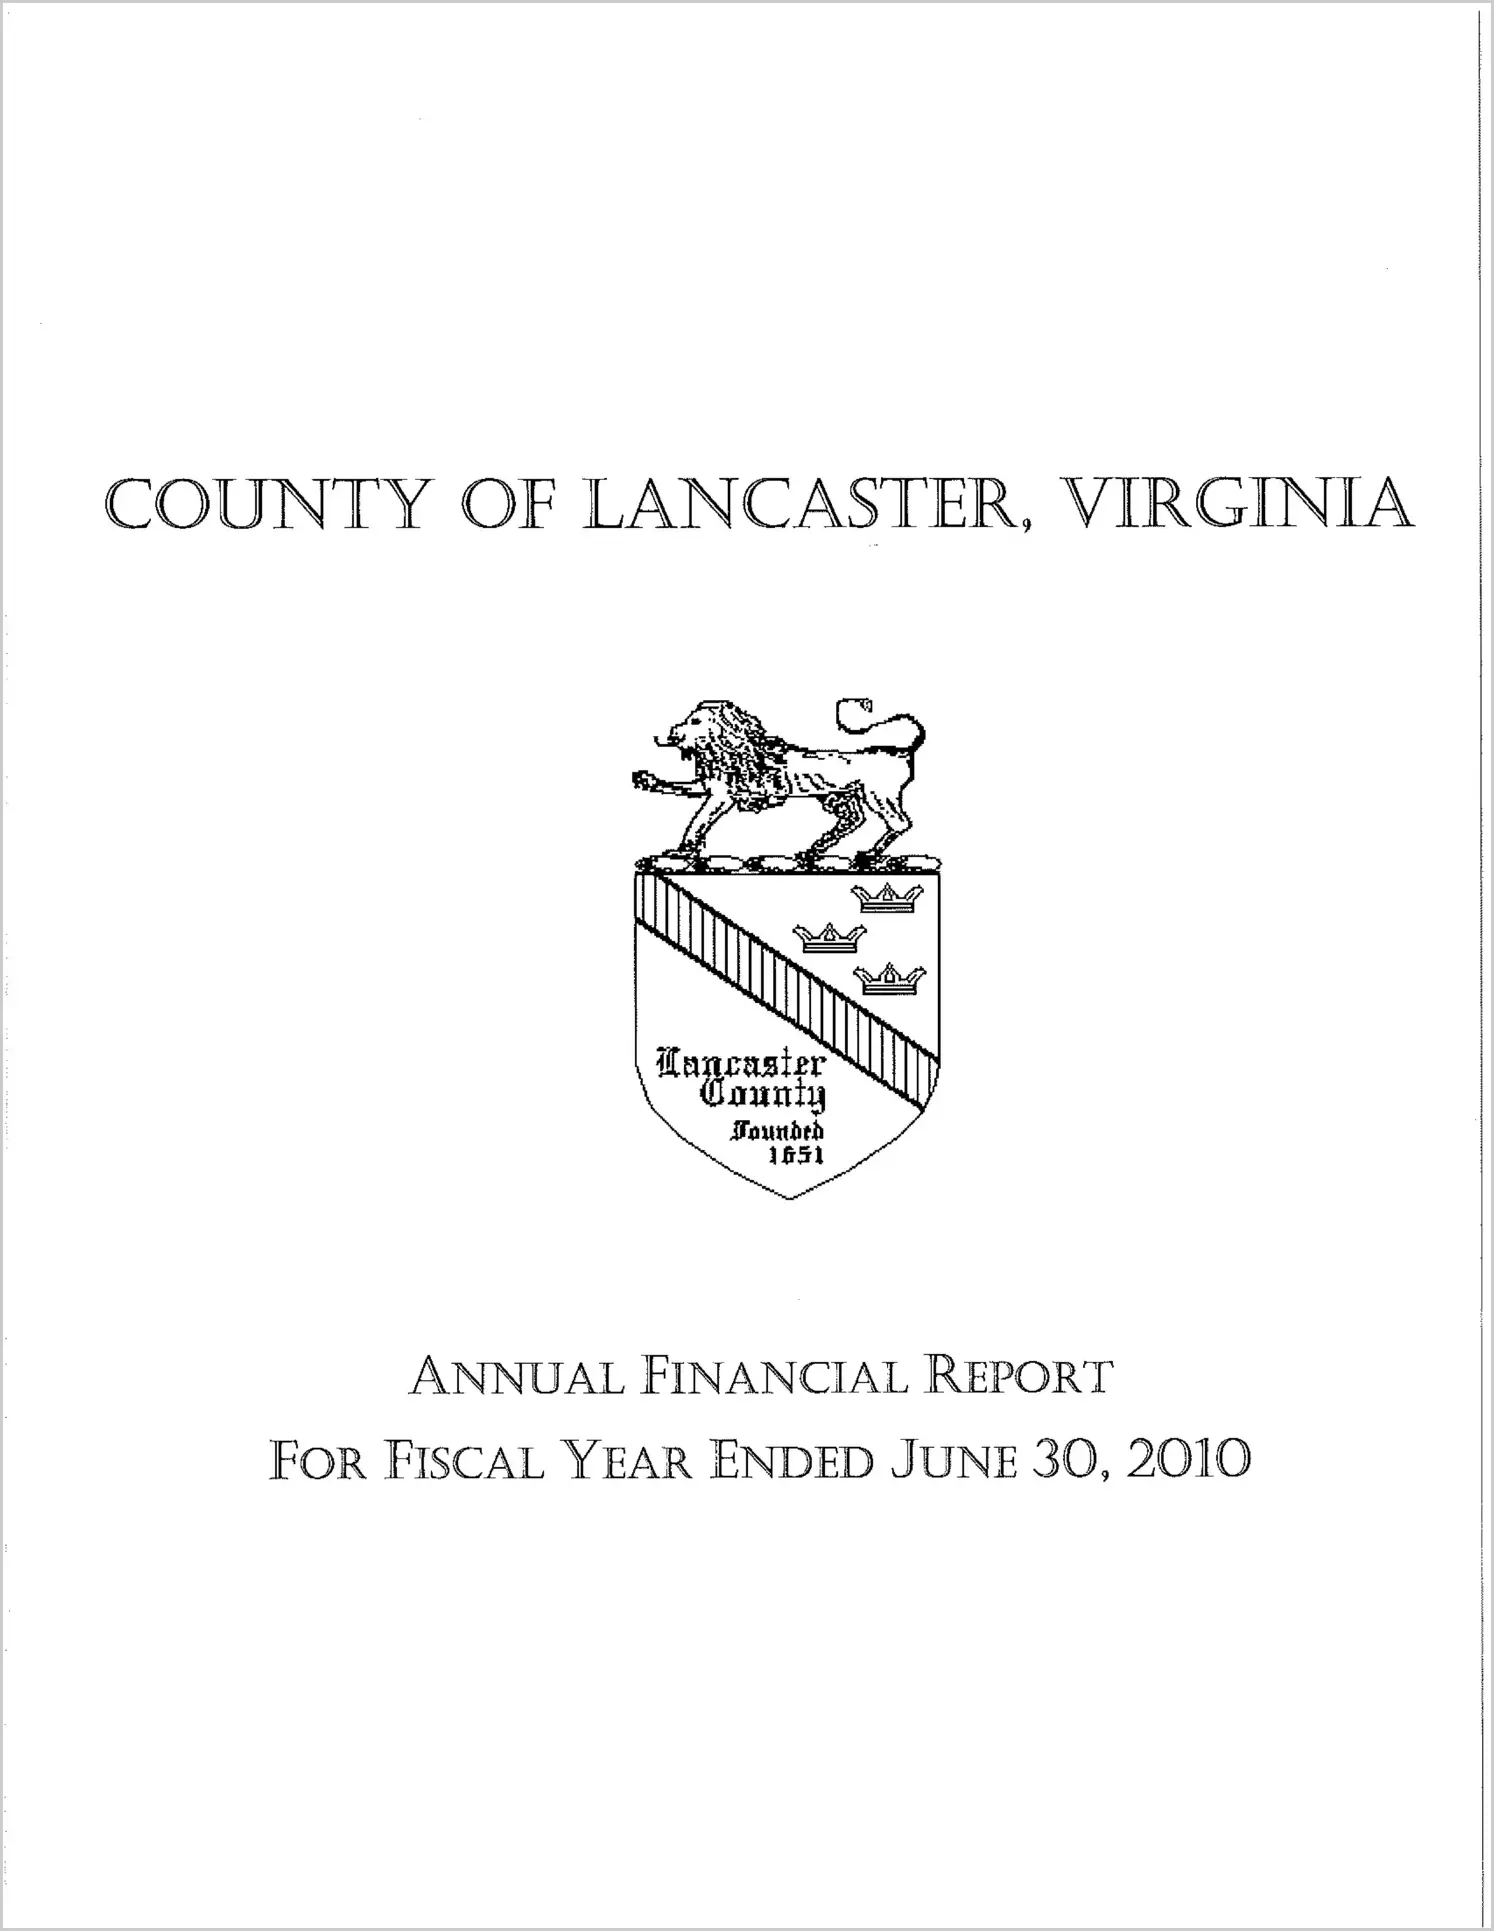 2010 Annual Financial Report for County of Lancaster